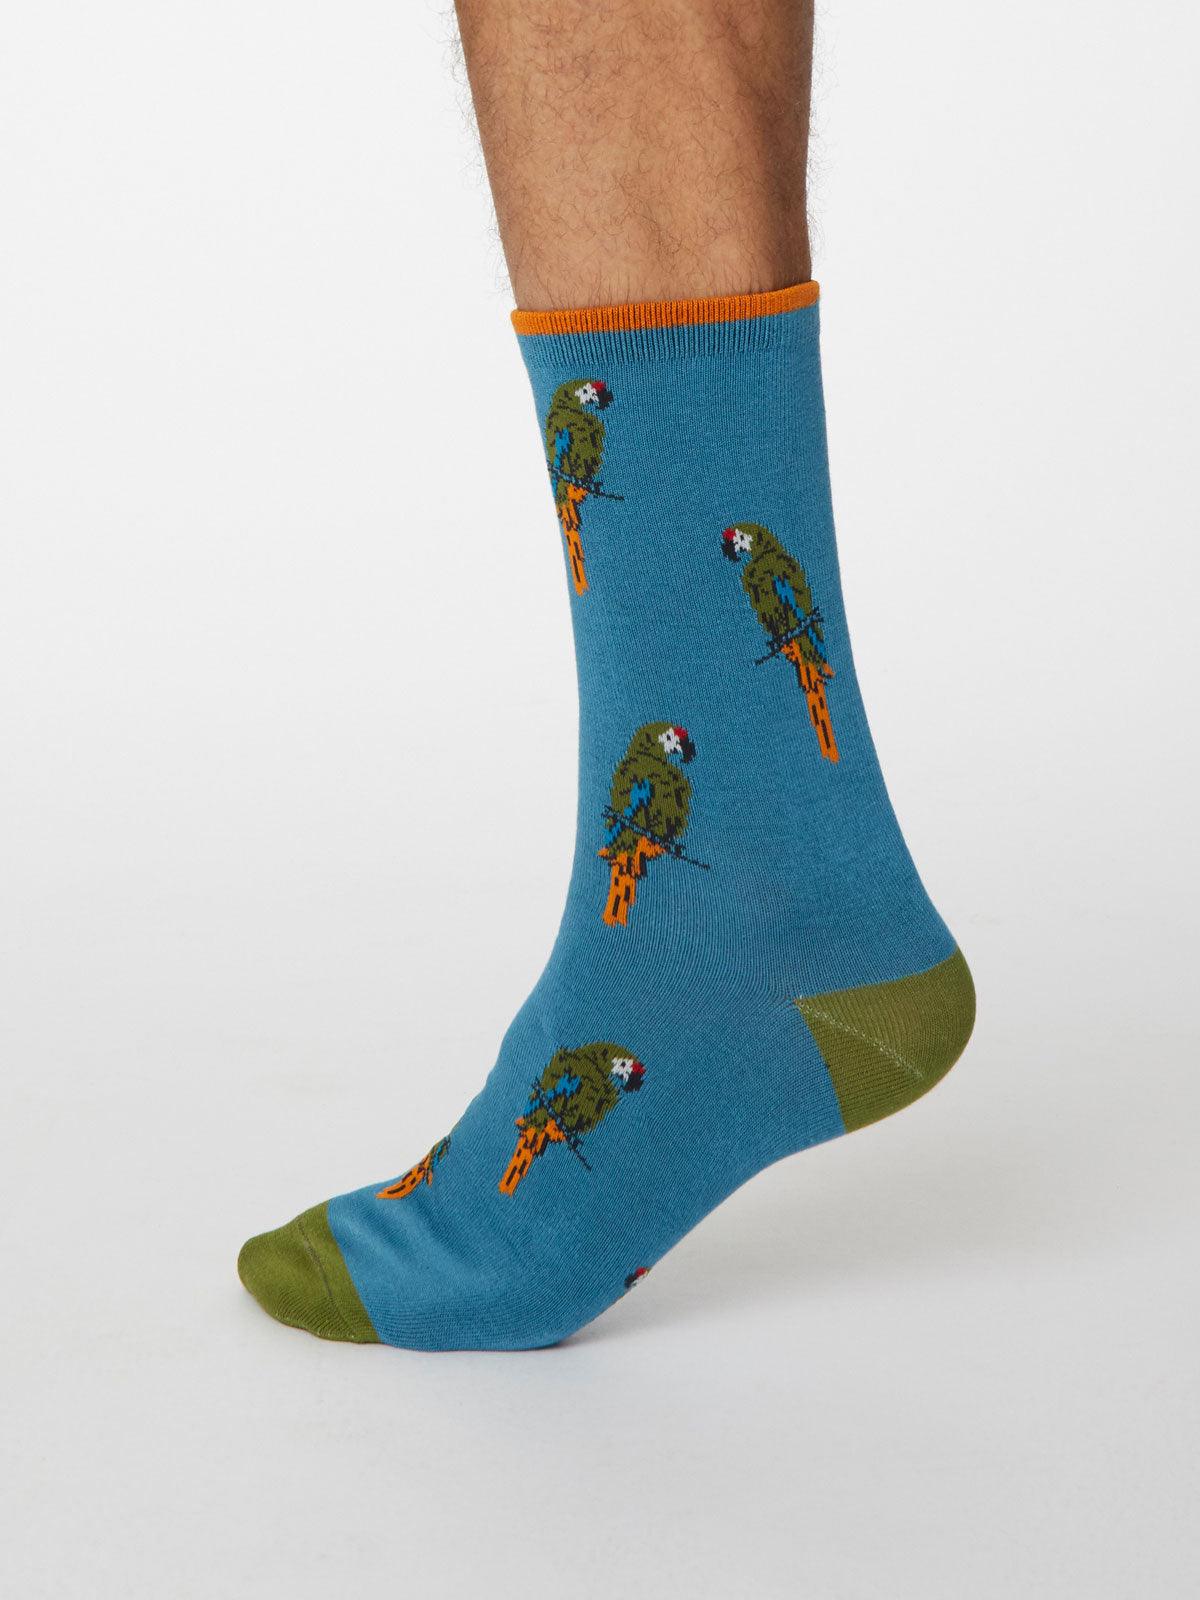 Pappagallo Socks - Dusty Blue - Thought Clothing UK